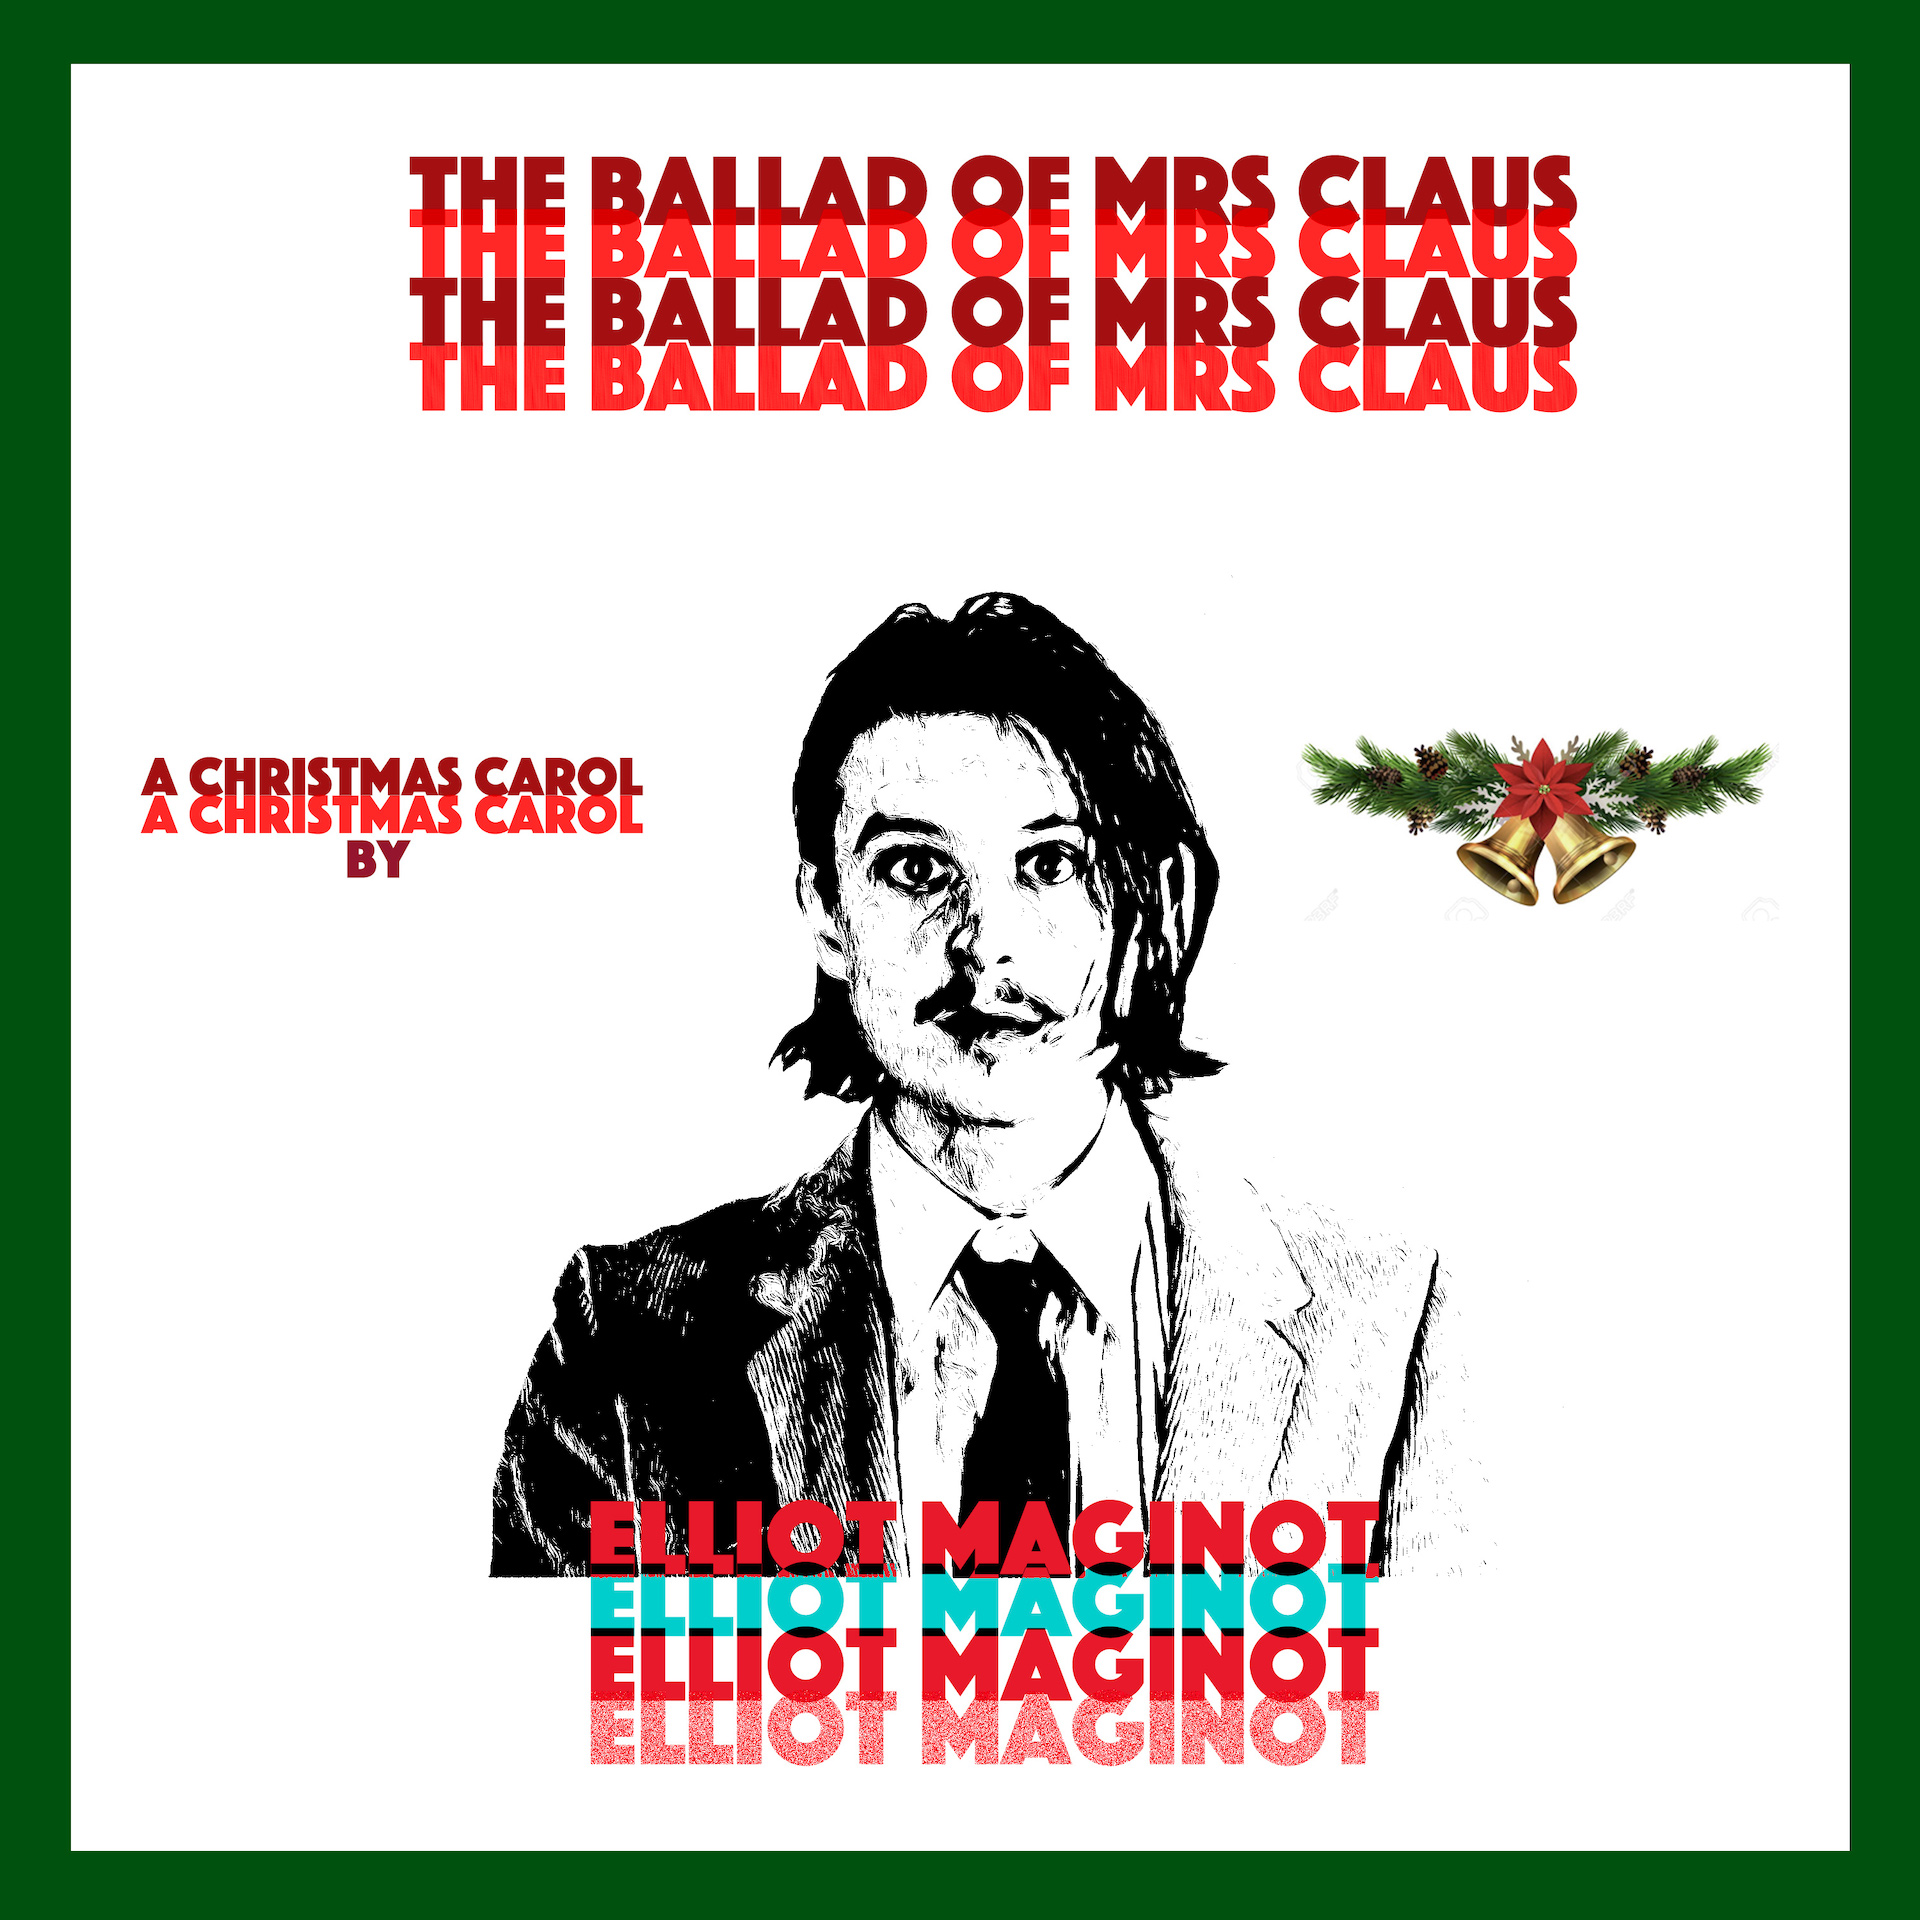 The Ballad of Mrs. Claus